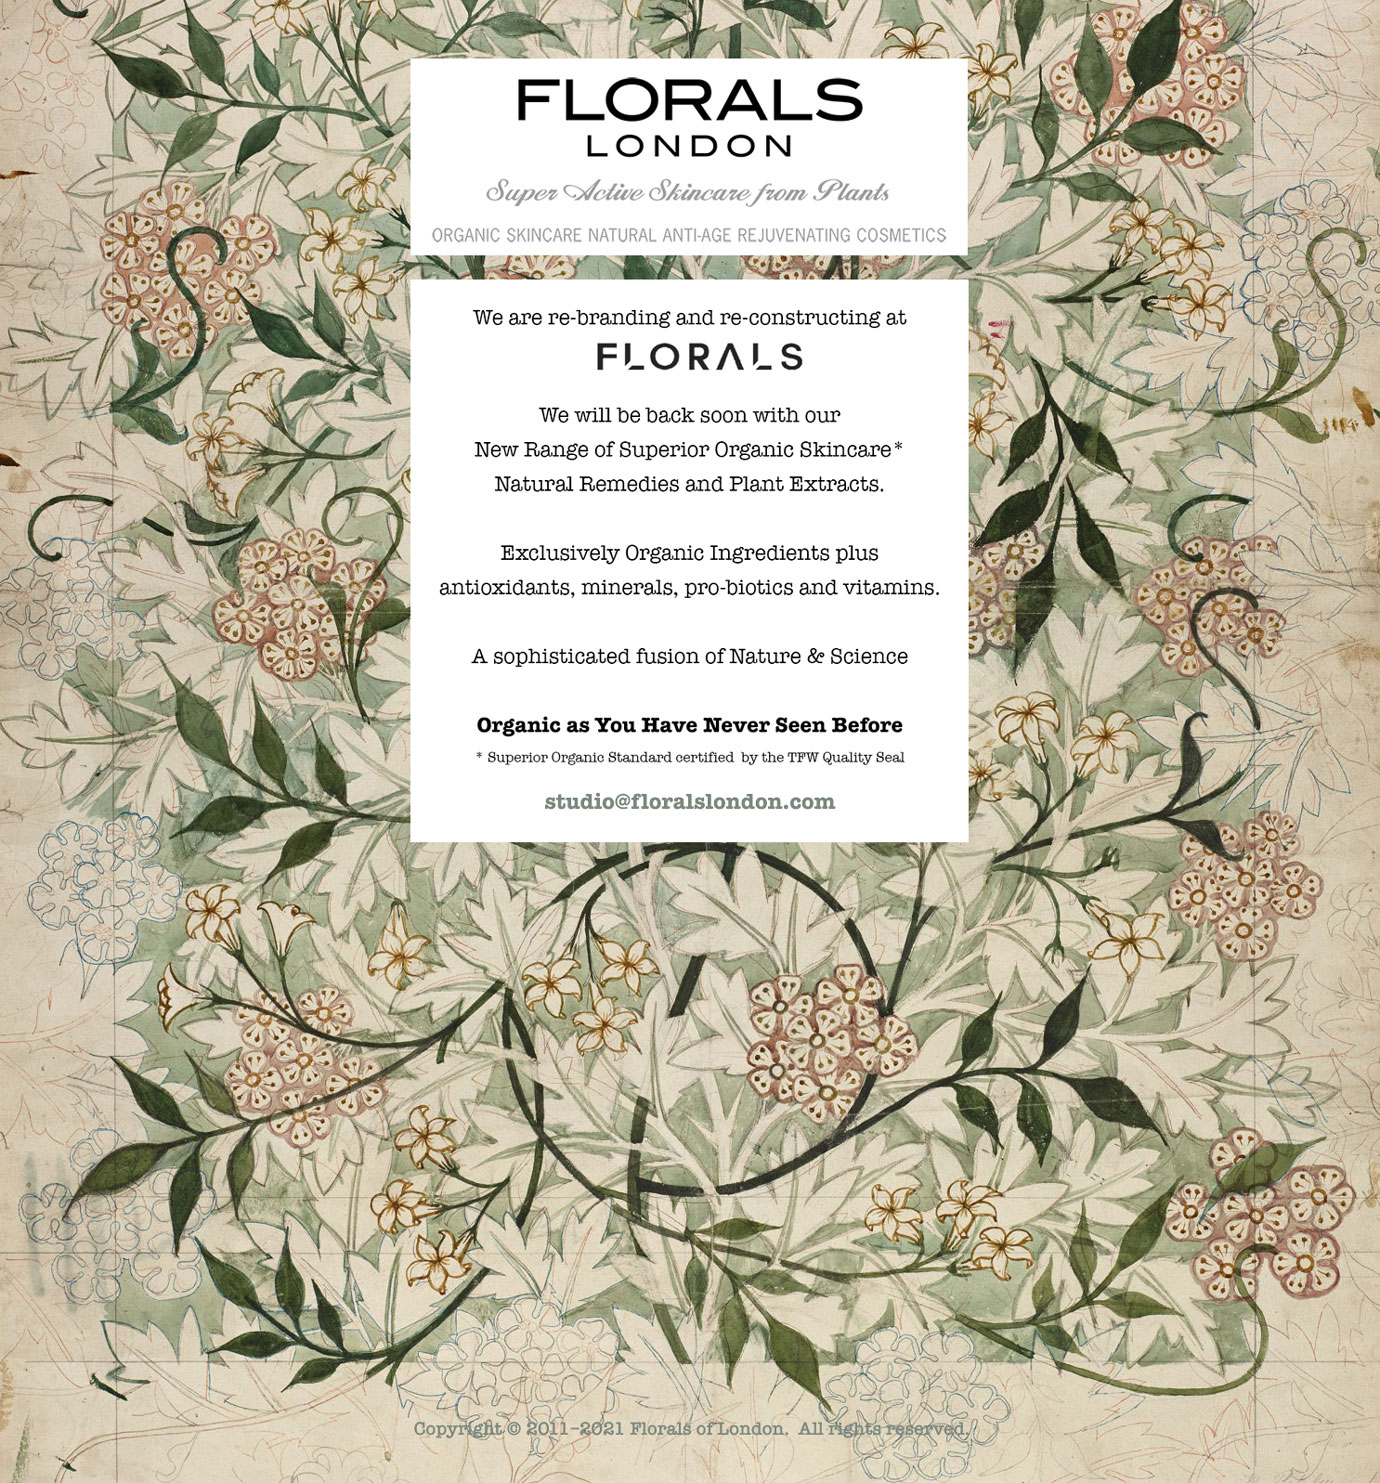 Florals of London / Super Active Skincare from Plants - Organic Skincare Natural Anti-Age Rejuvenating Cosmetics.